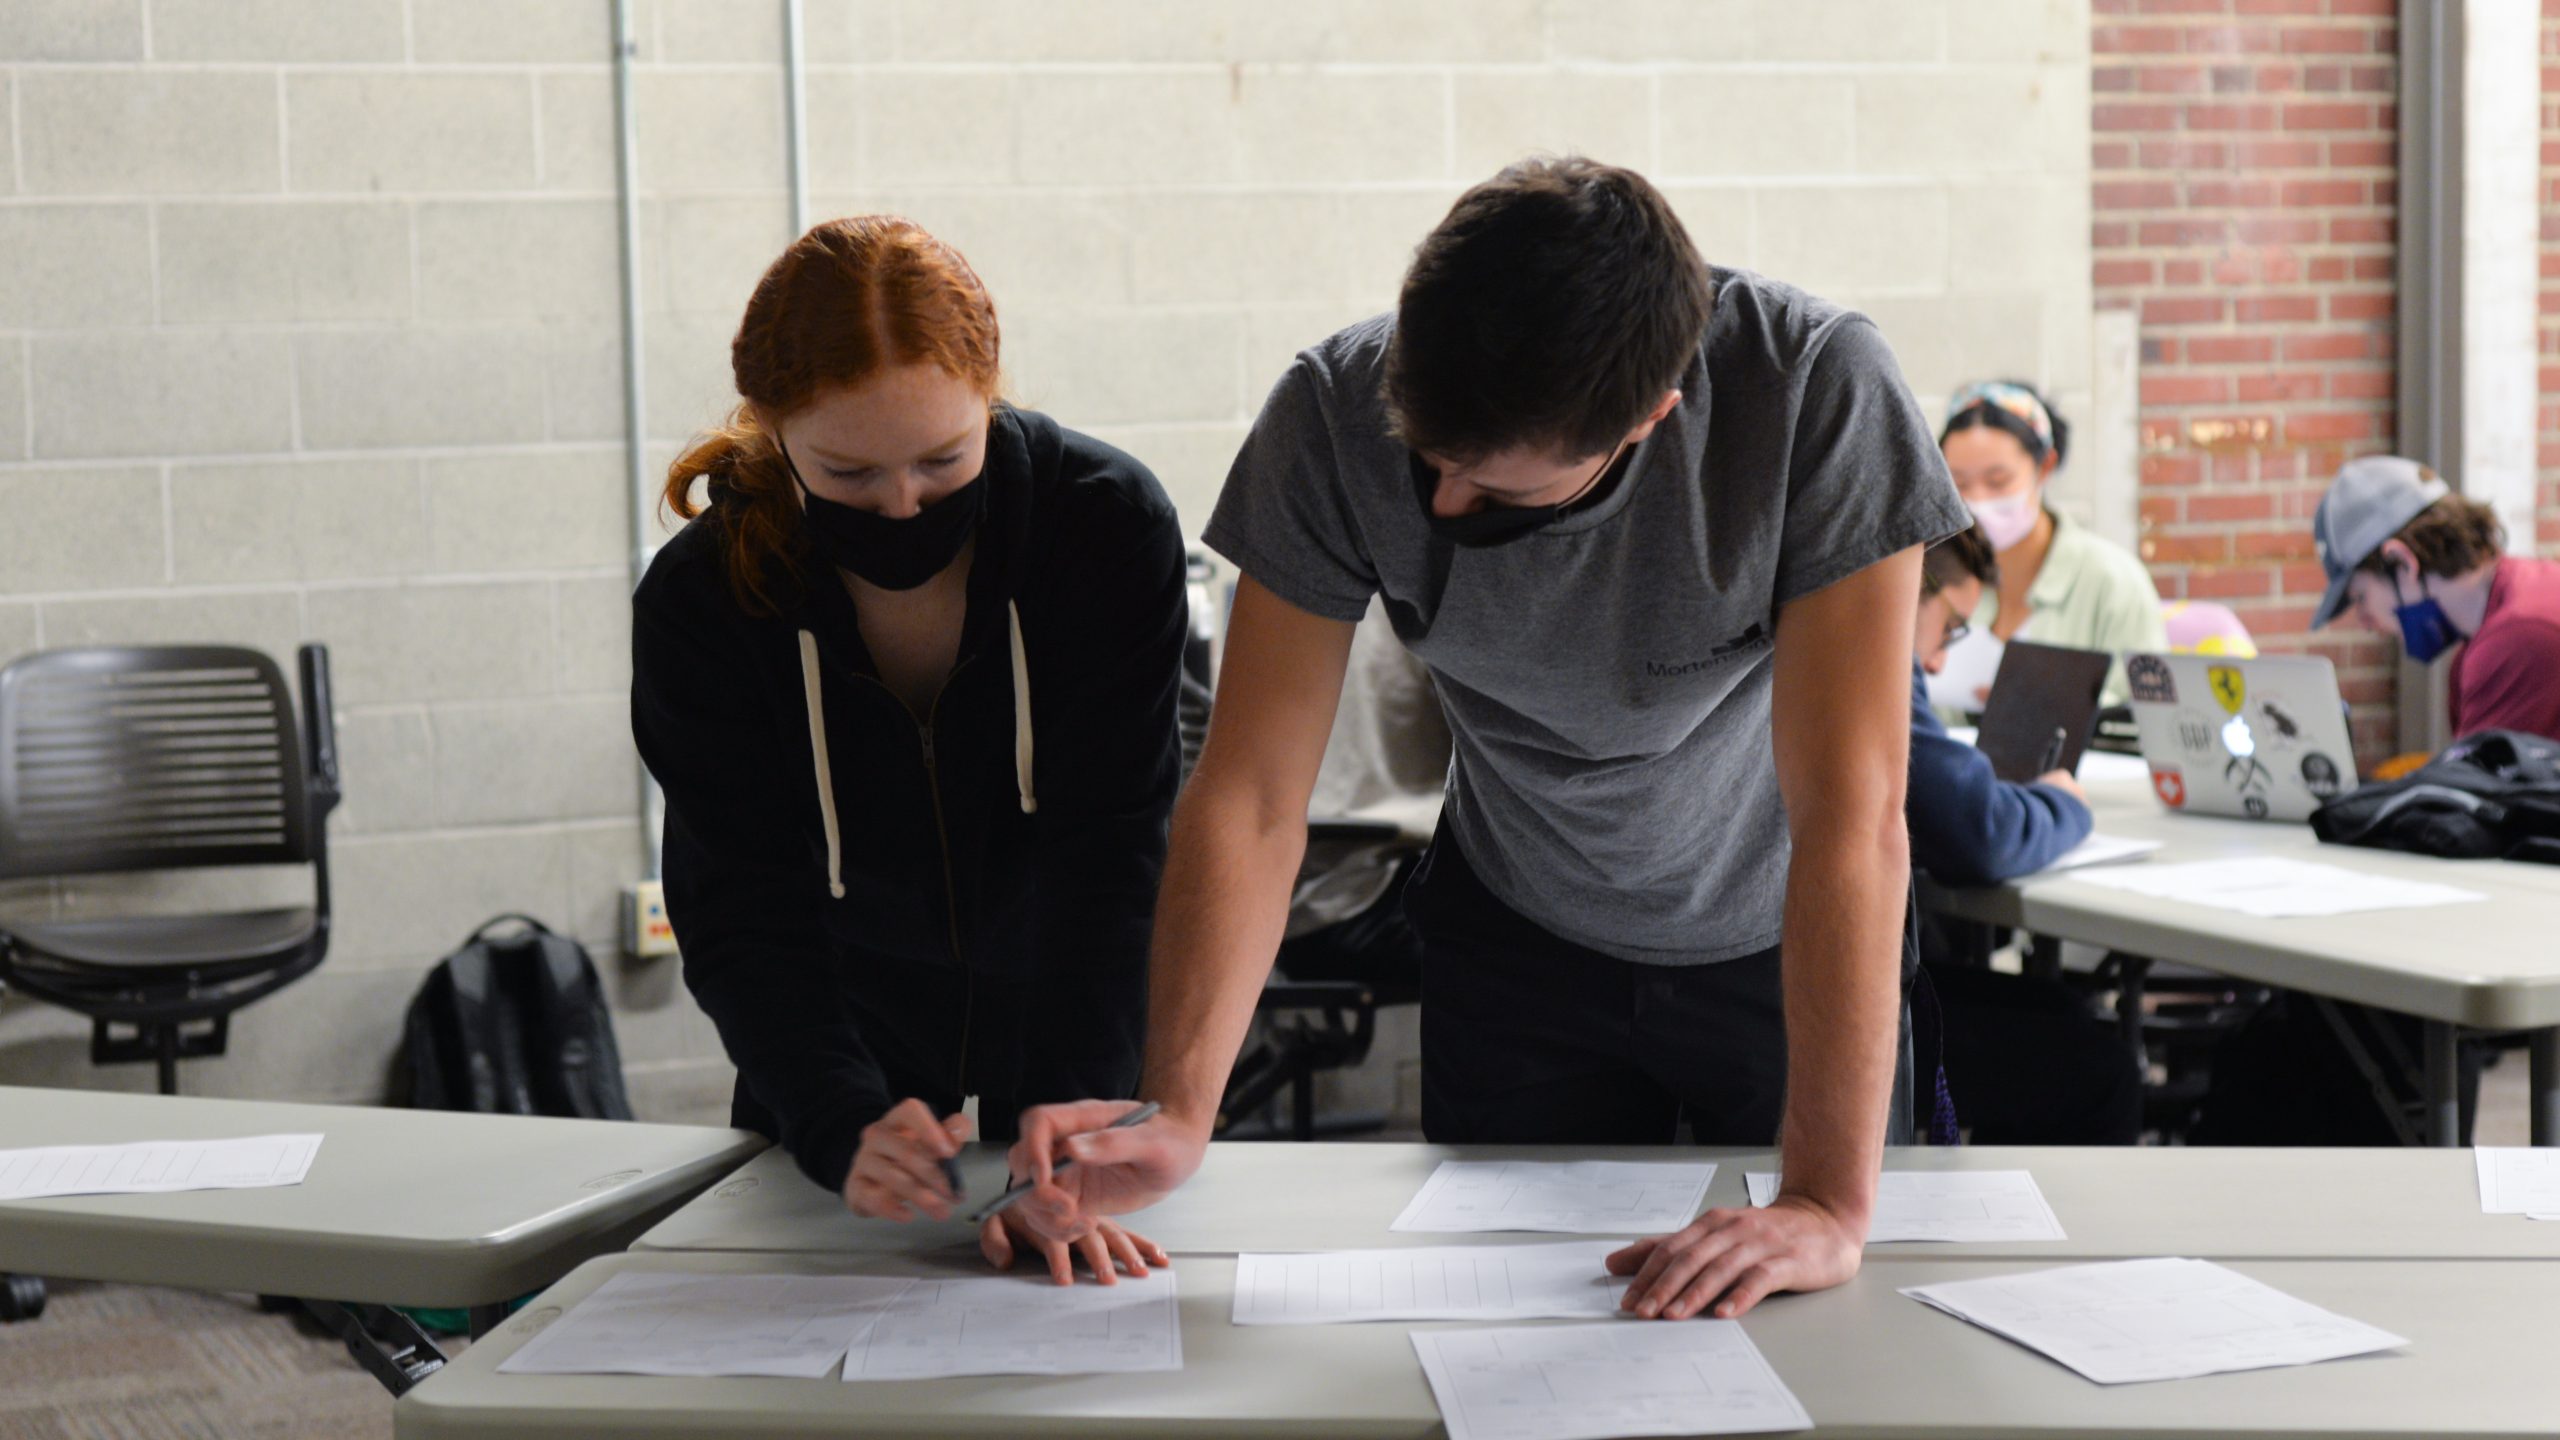 Two students stand over papers laid out on a table